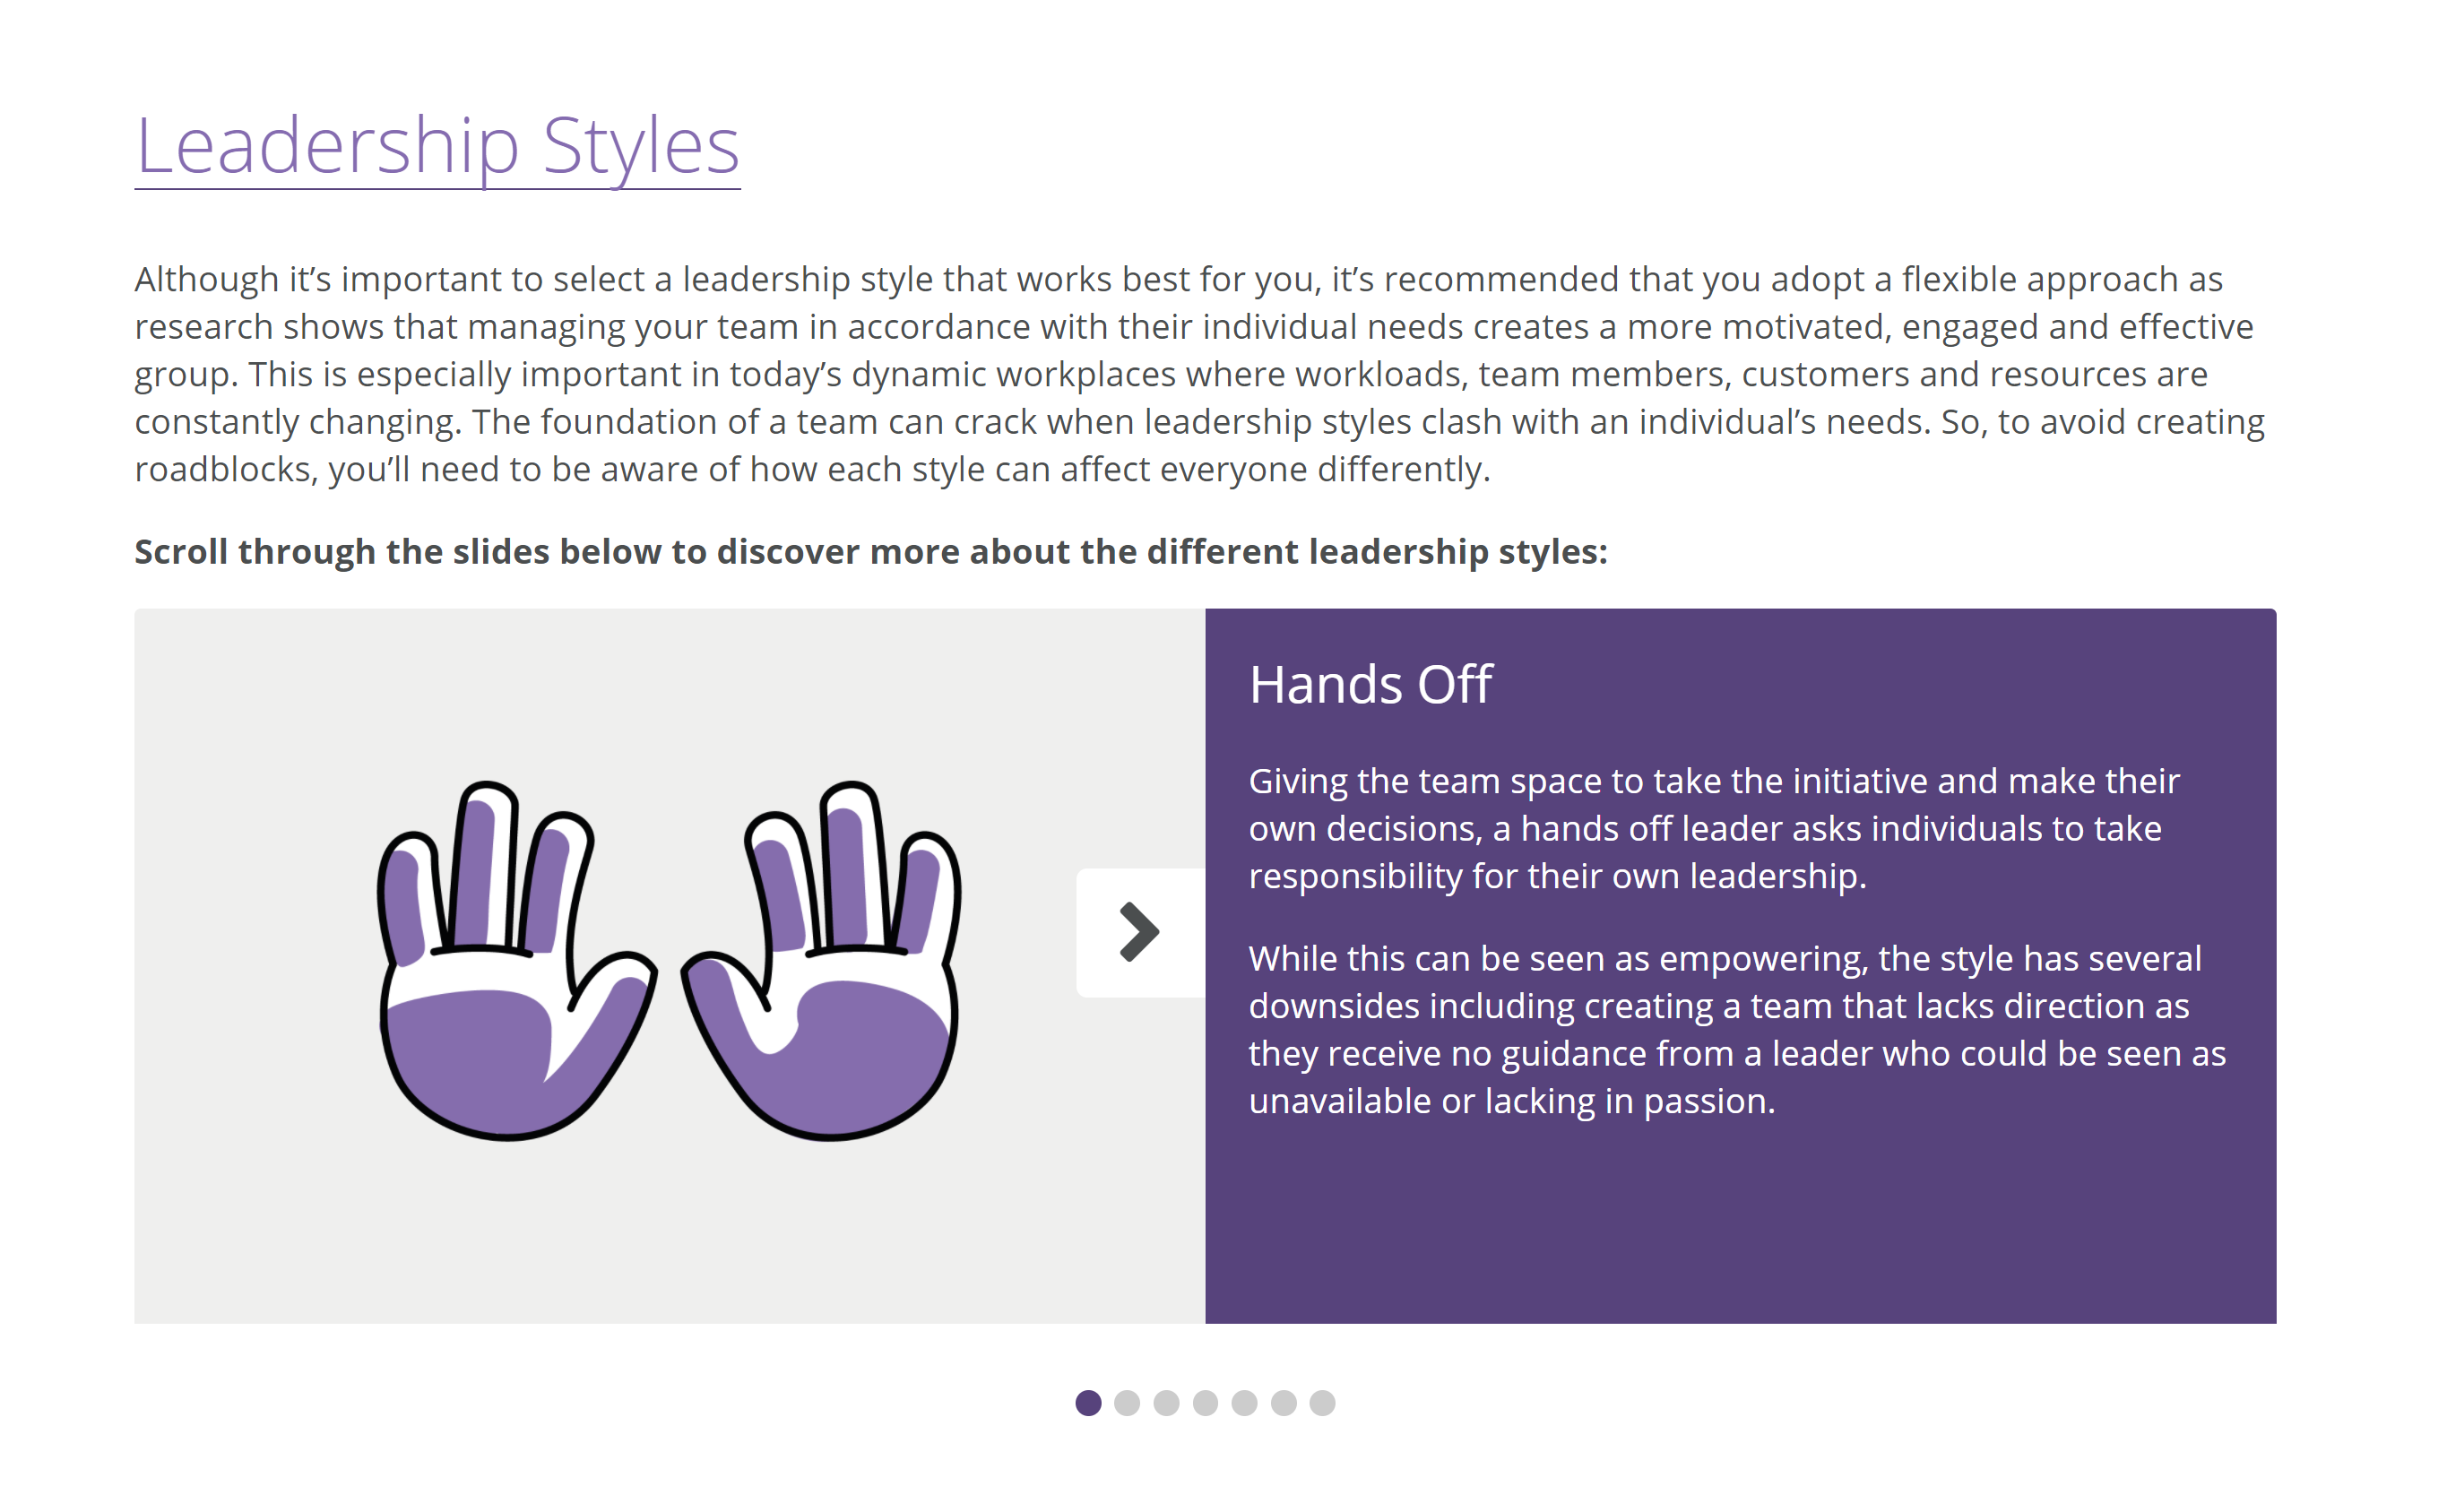 This image shows a screen shot of the developing leadership module